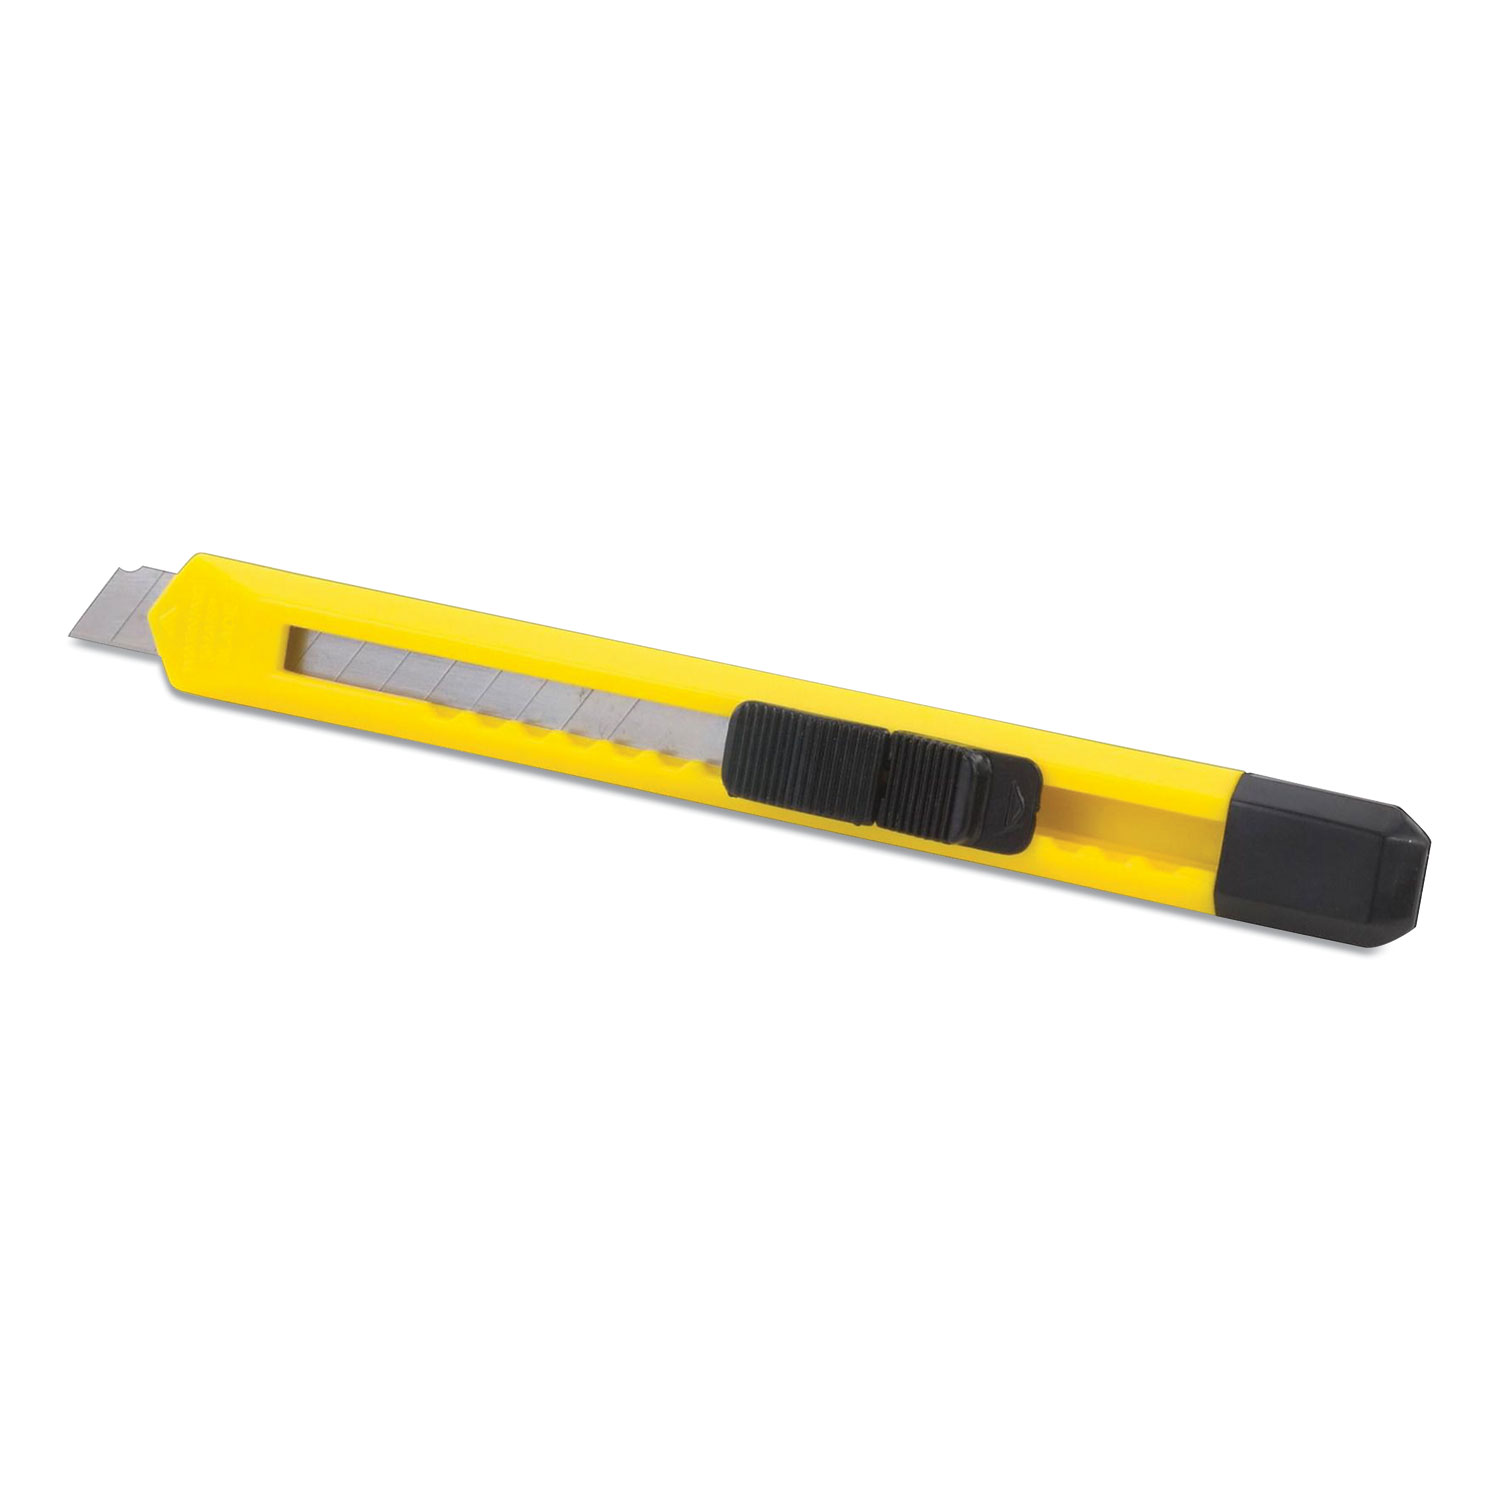 Stanley® Quick Point Utility Knife, 9 mm, Yellow/Black